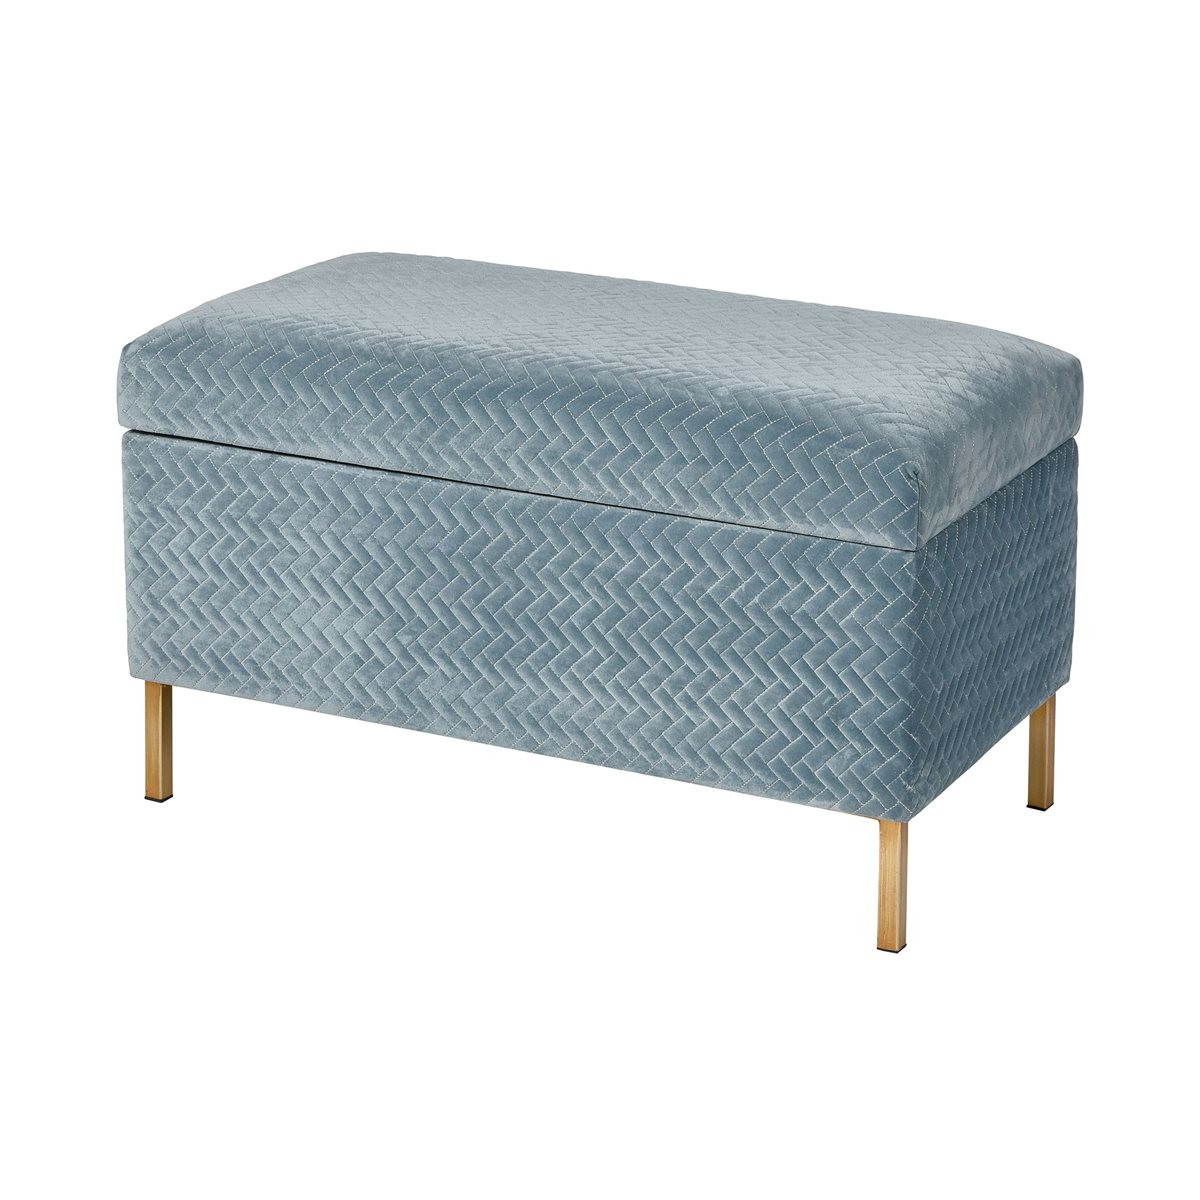 Gold Storage Bench
 Shake Storage Bench in Blue Chenille and Gold